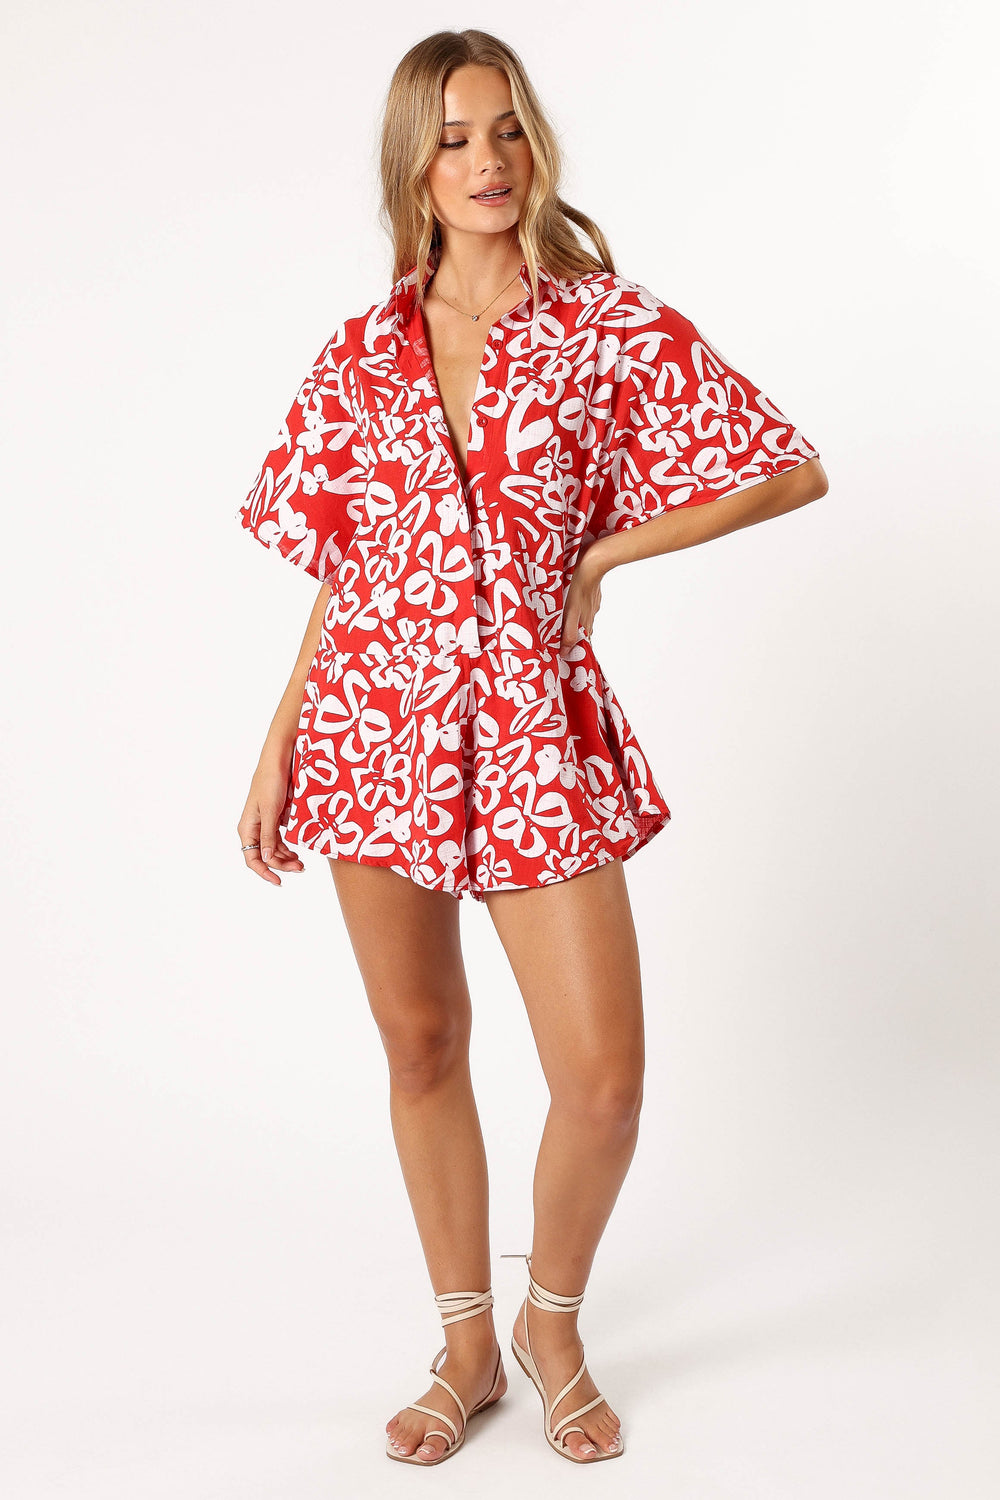 Petal and Pup USA Rompers Sebastian playsuit - Red Floral